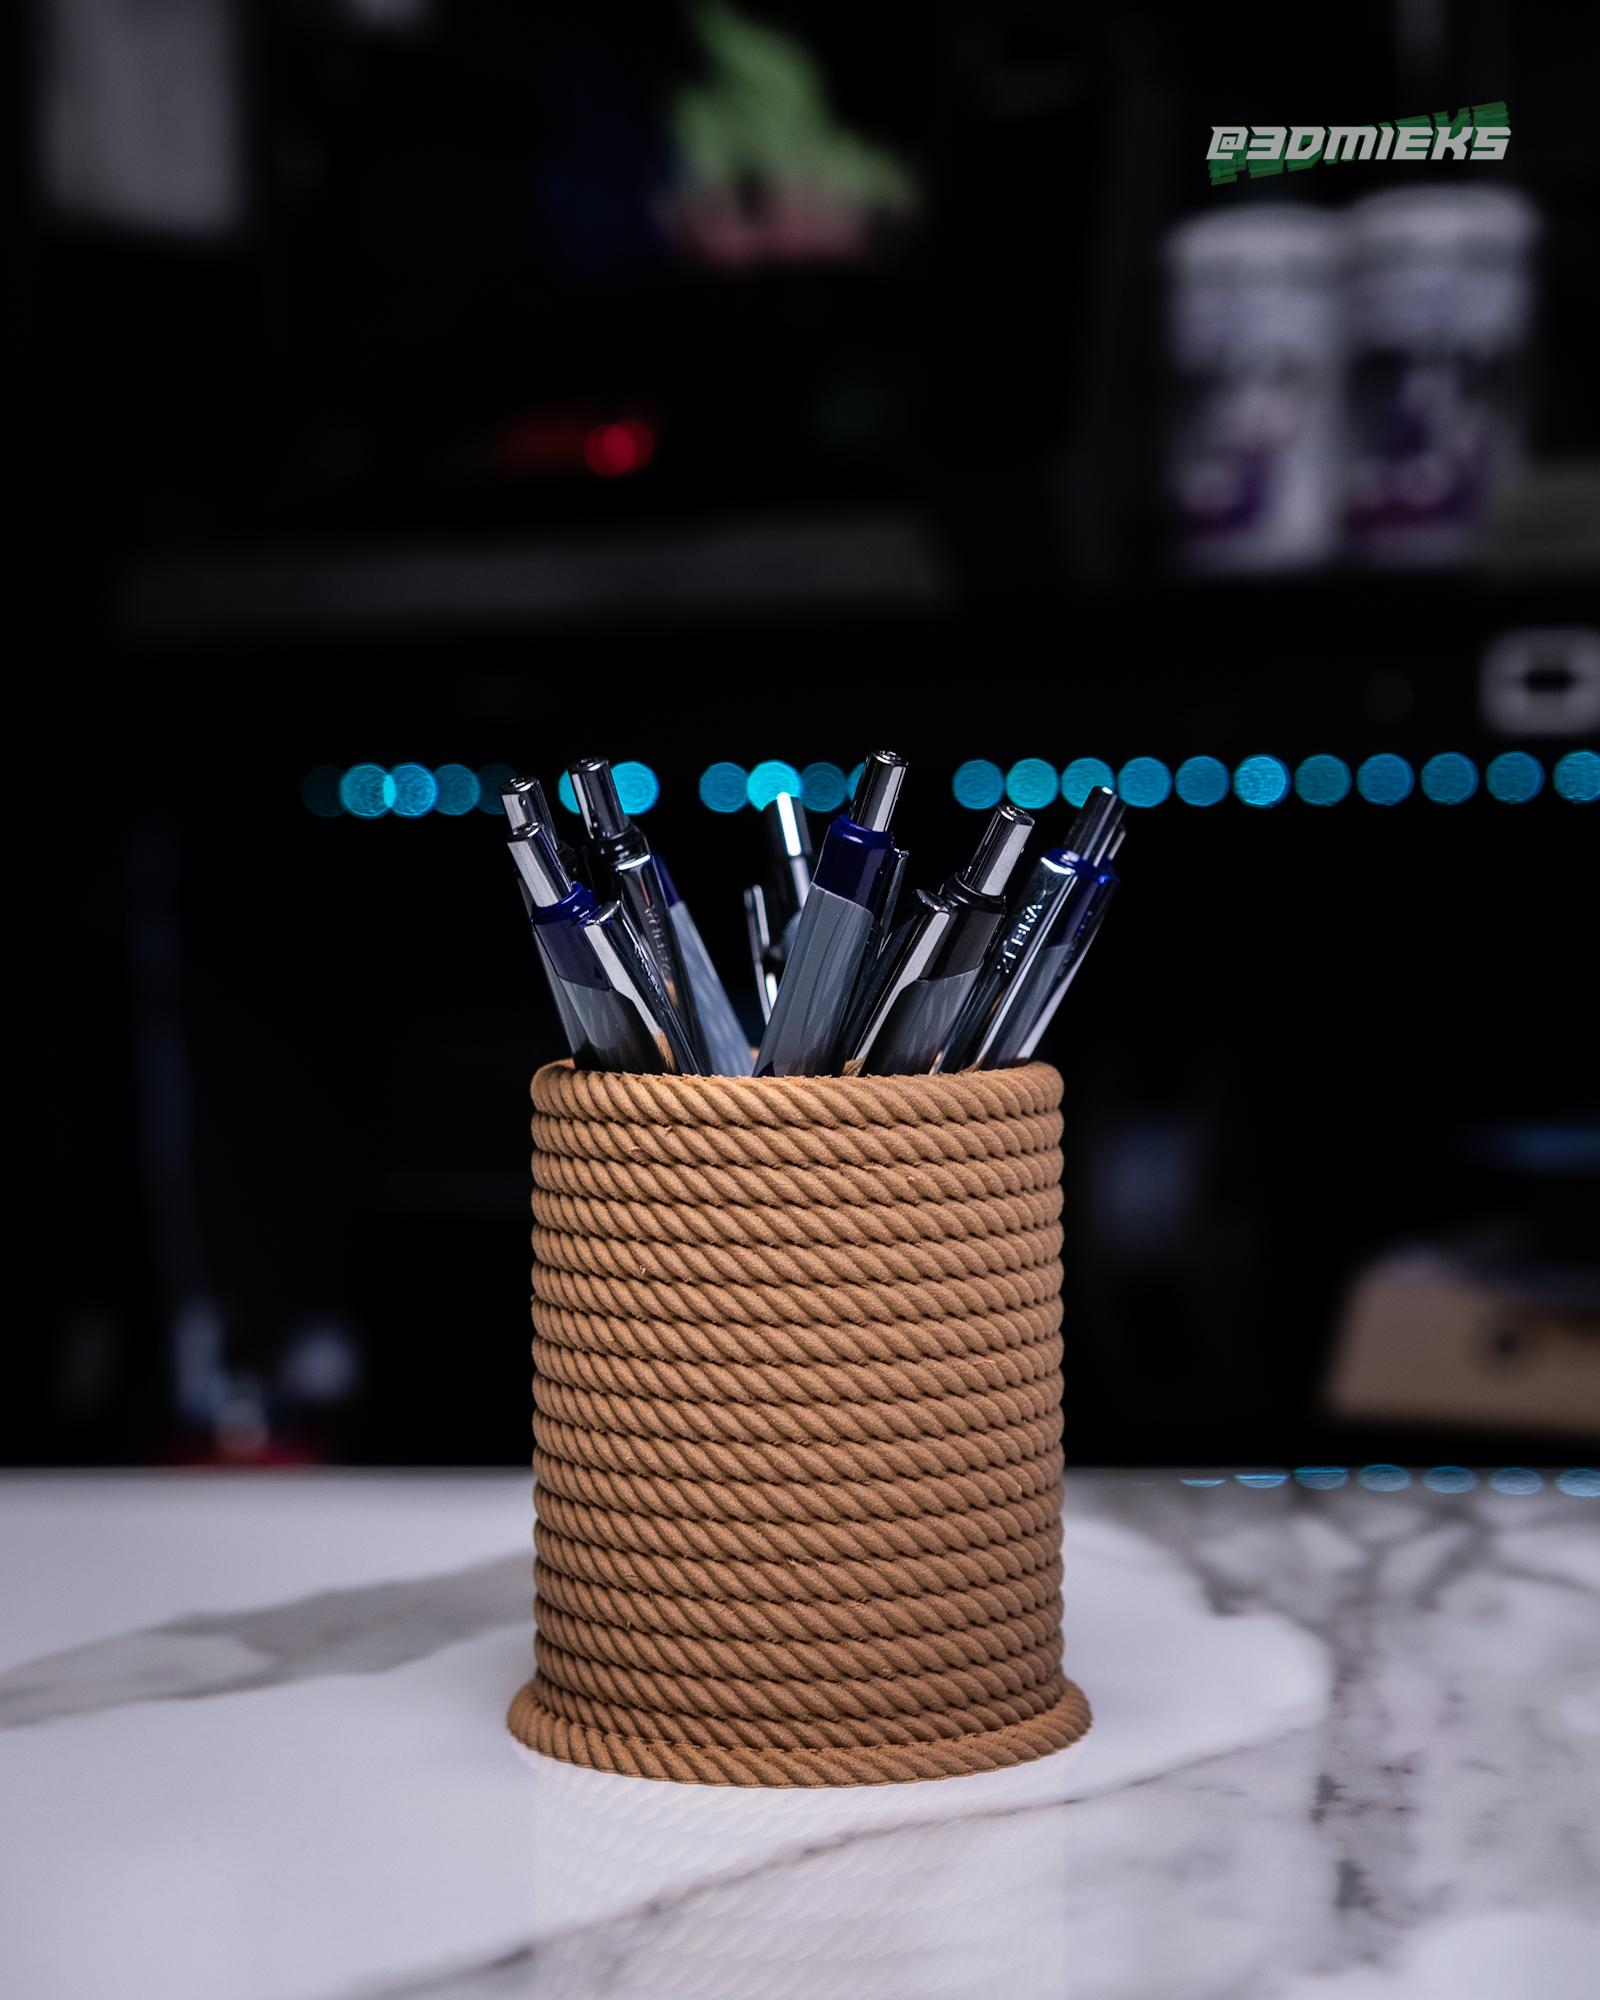 Rope Series | Pencil Holder Cup 3d model